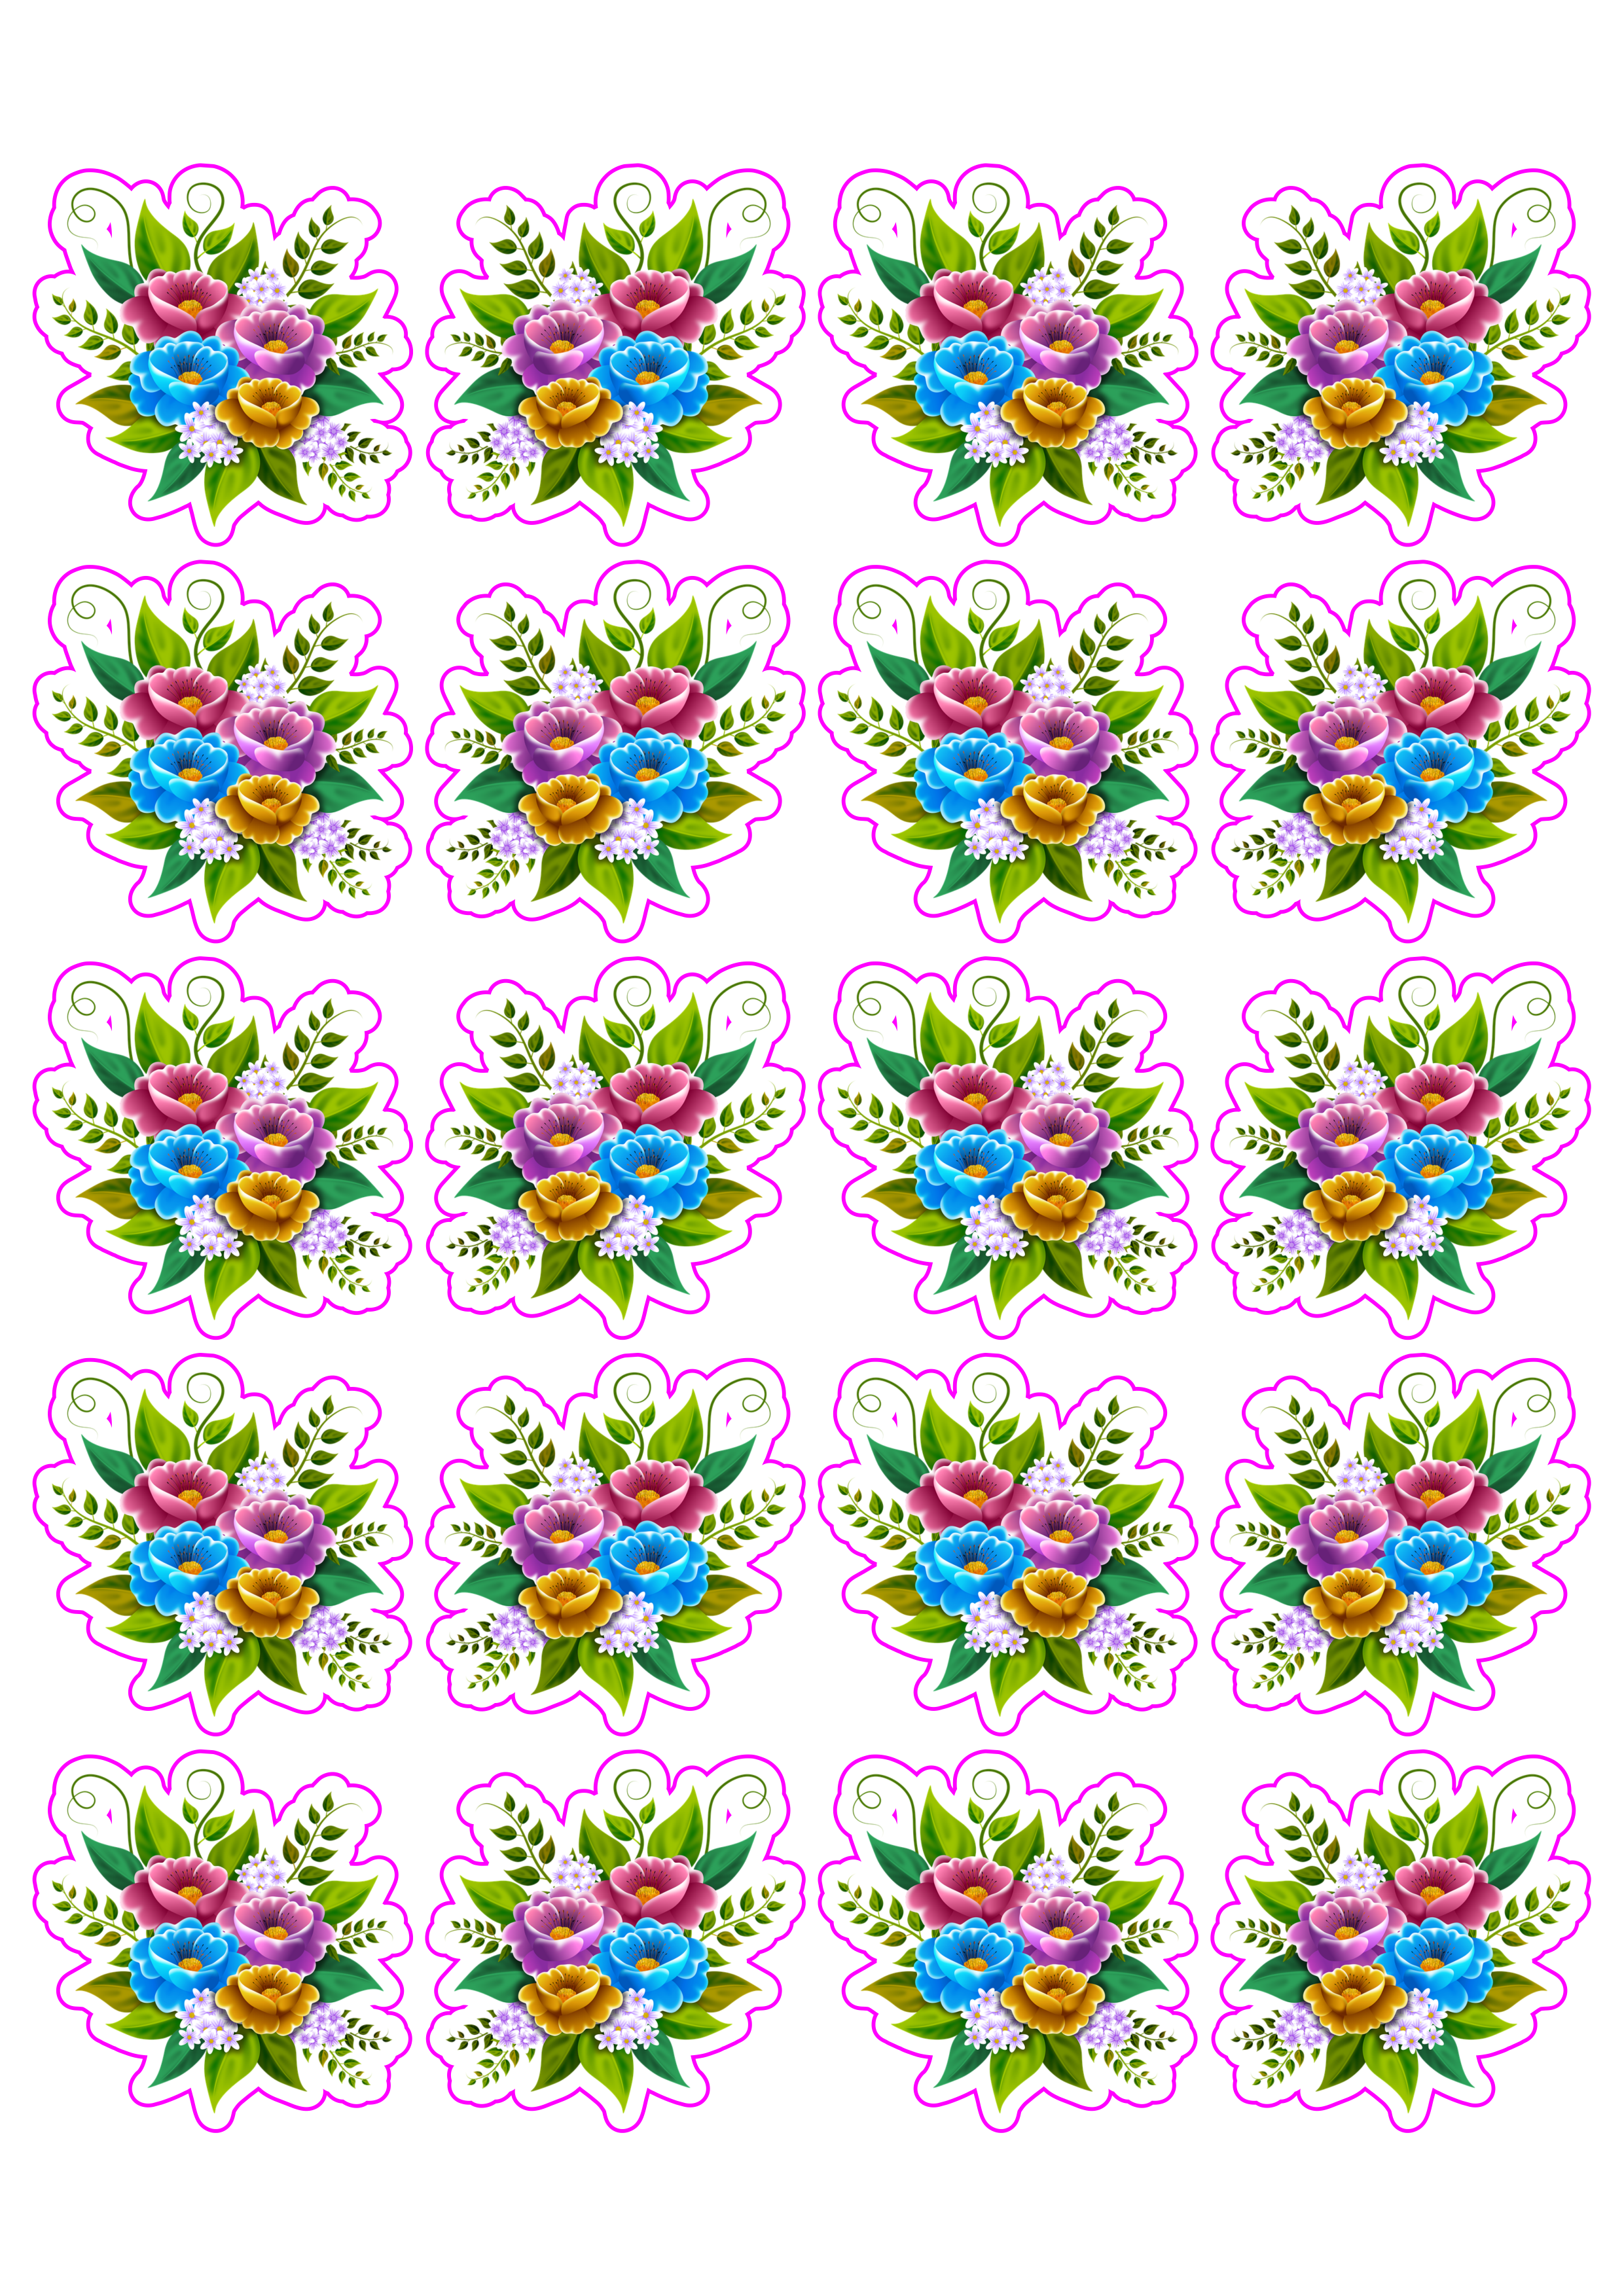 stickers-flores